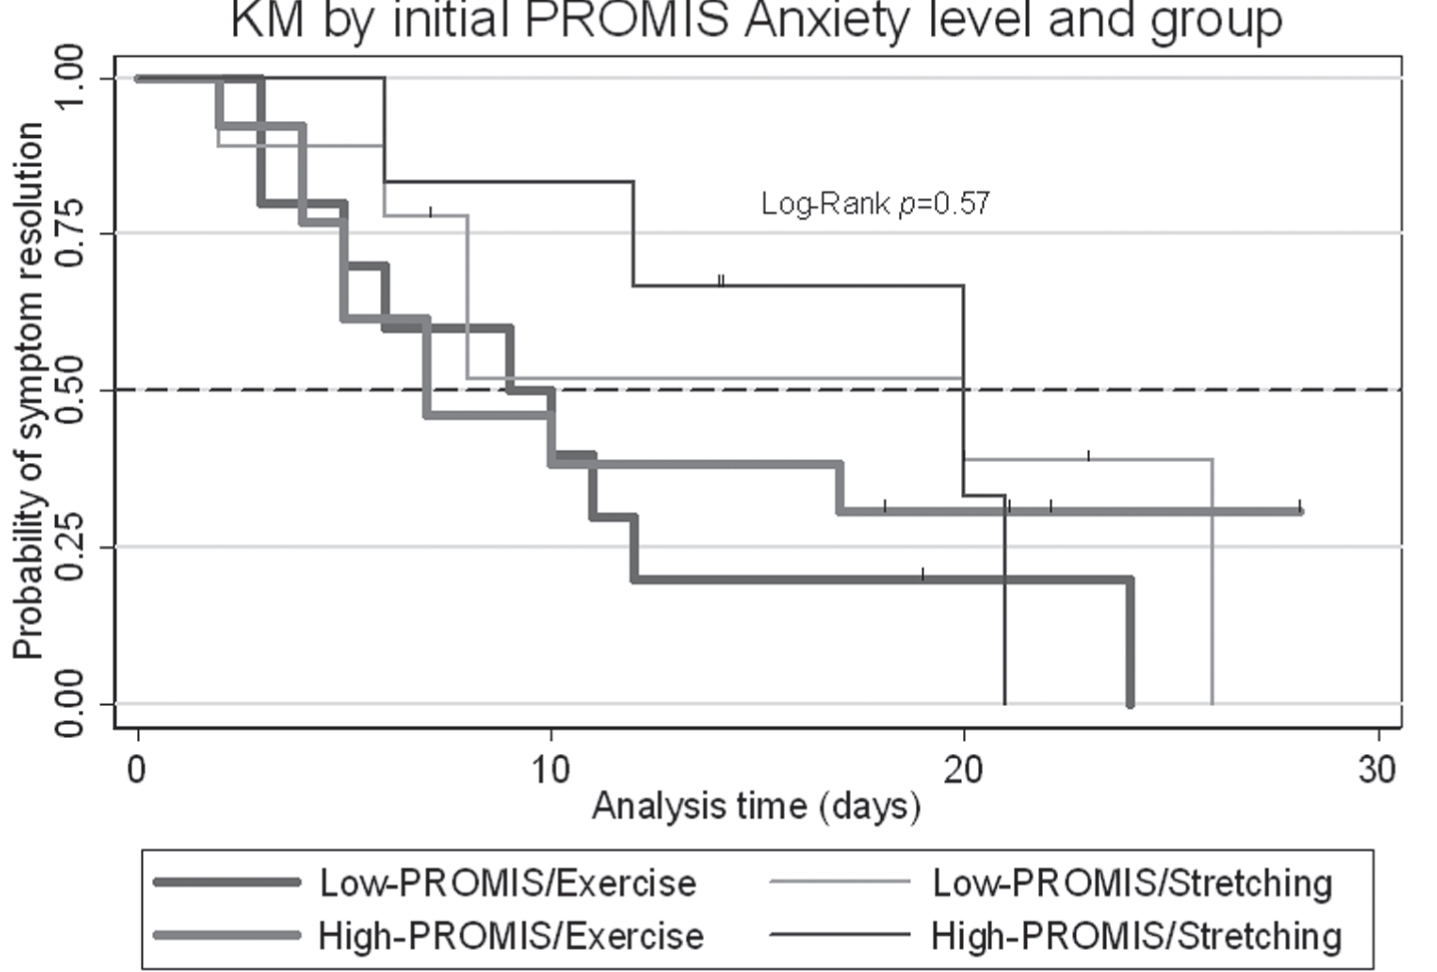 Kaplan Meier plot displaying time from concussion injury to symptom resolution, stratified by PROMIS Anxiety level at the initial visit and randomization group.